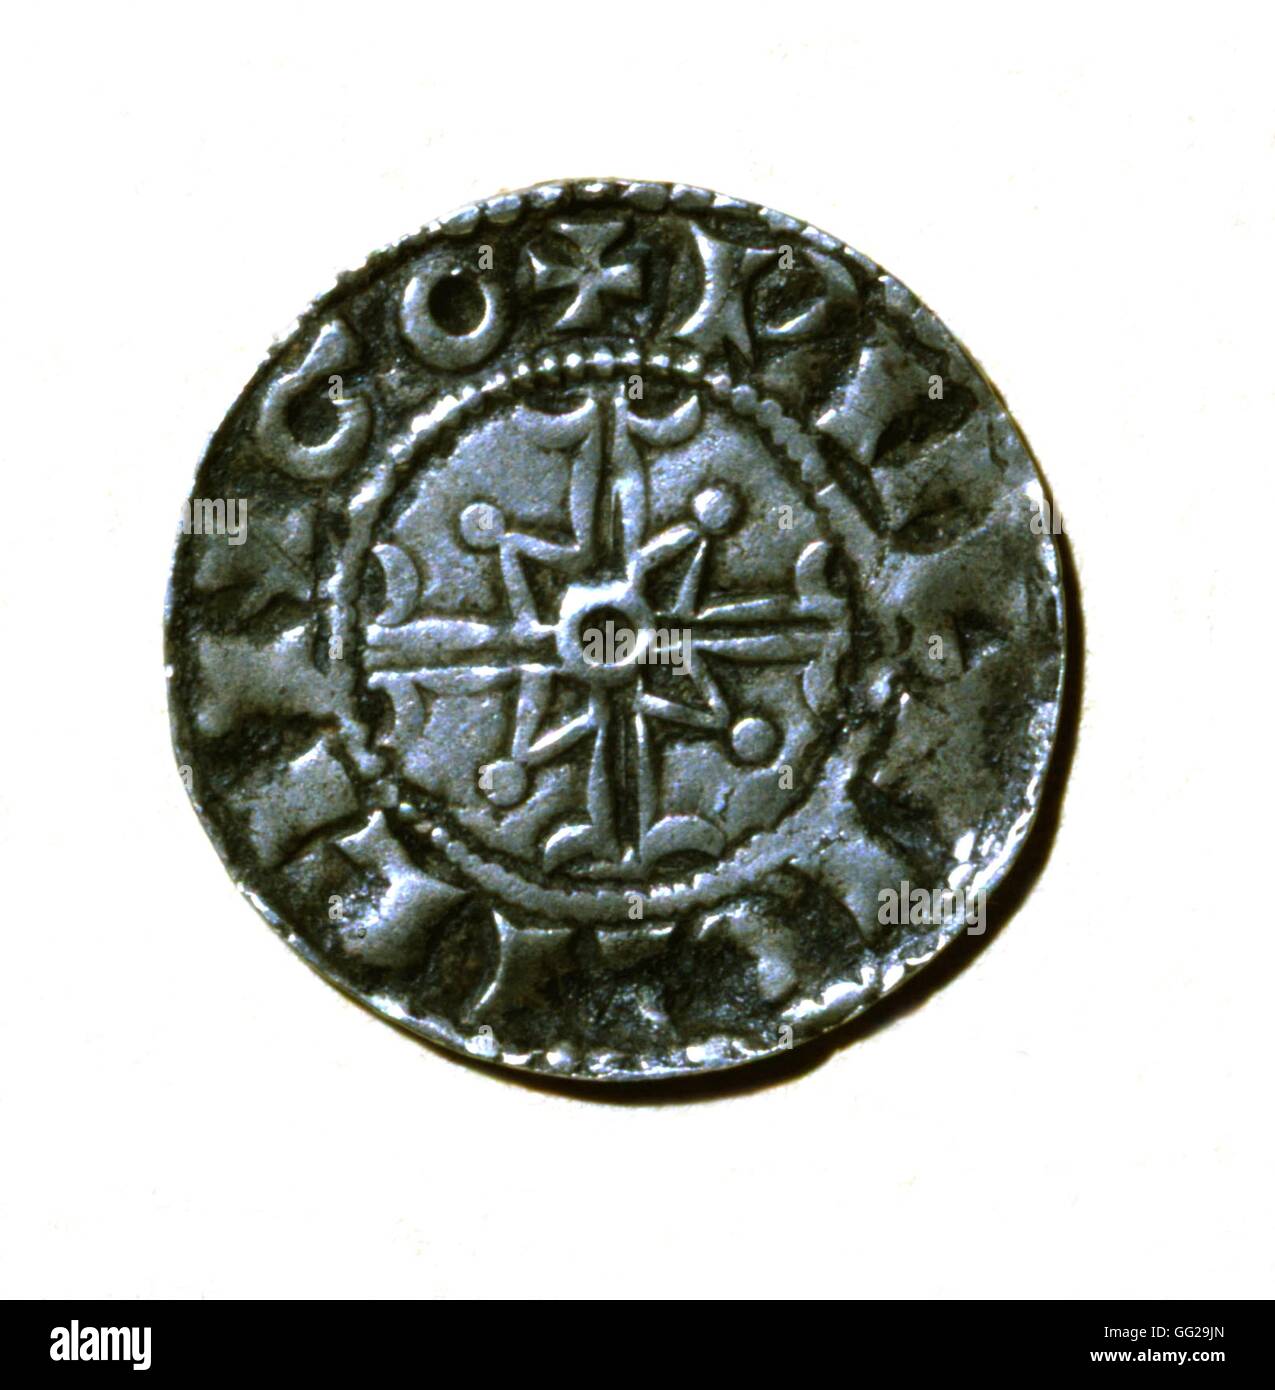 Recto of a silver denier from William the Conqueror (1027/28-1087), duke of Normandy (1035-1087) and king of England (1066-1087) 11th century France Stock Photo